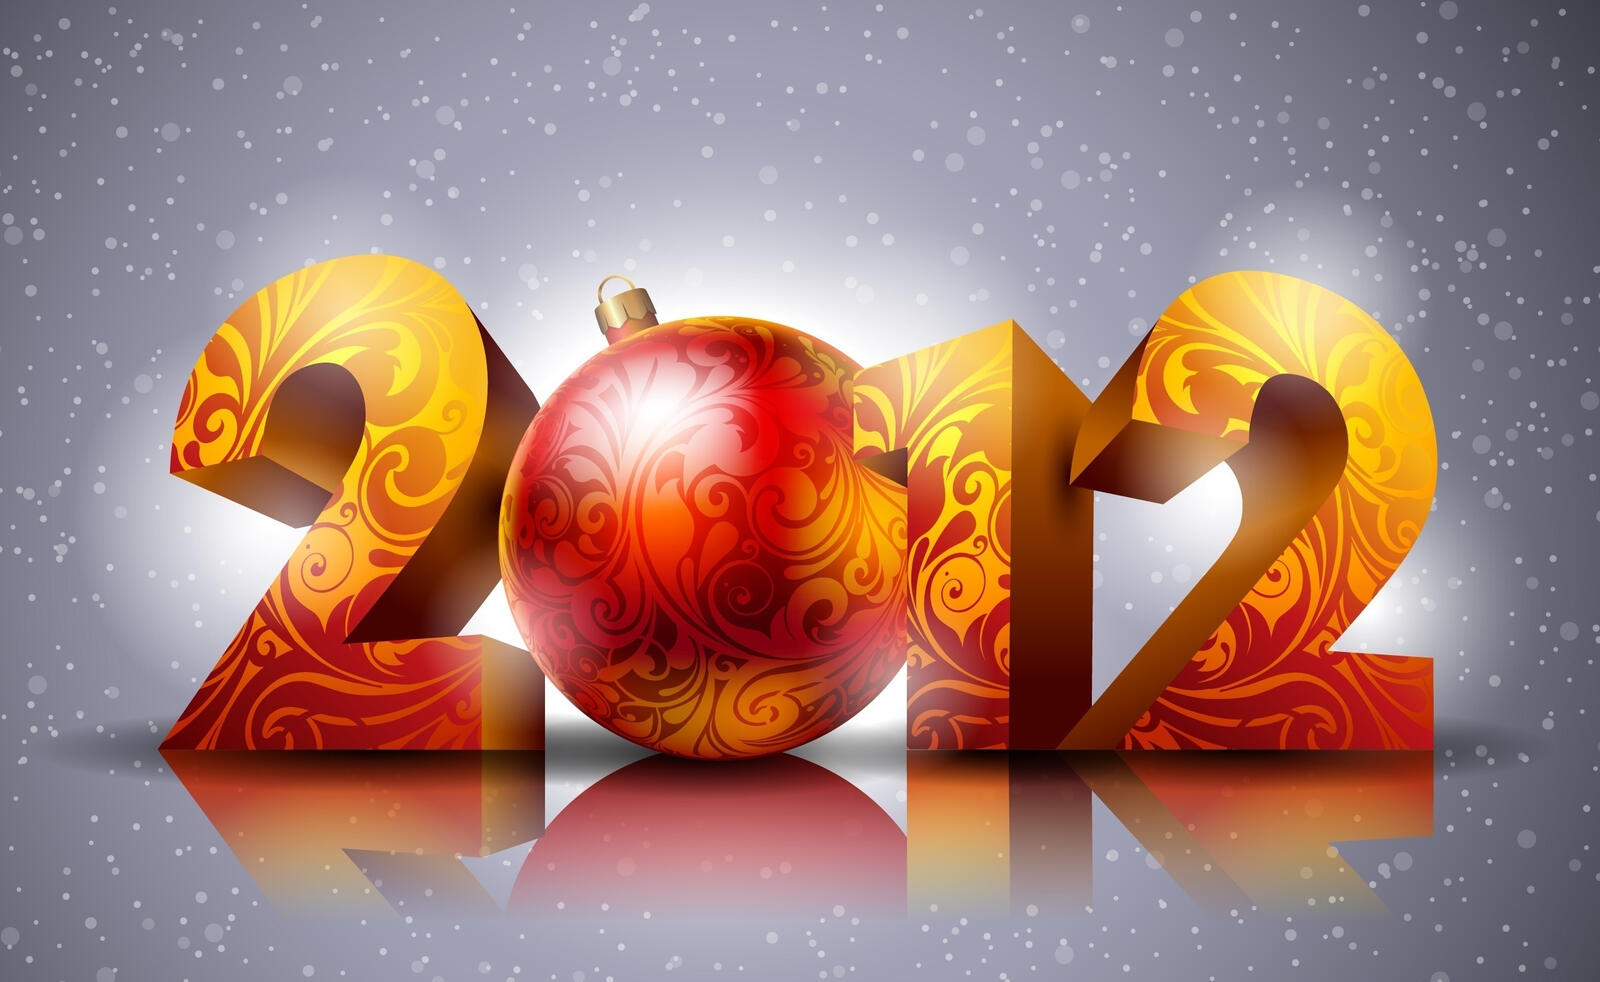 Wallpapers 2012 inscription New Year on the desktop